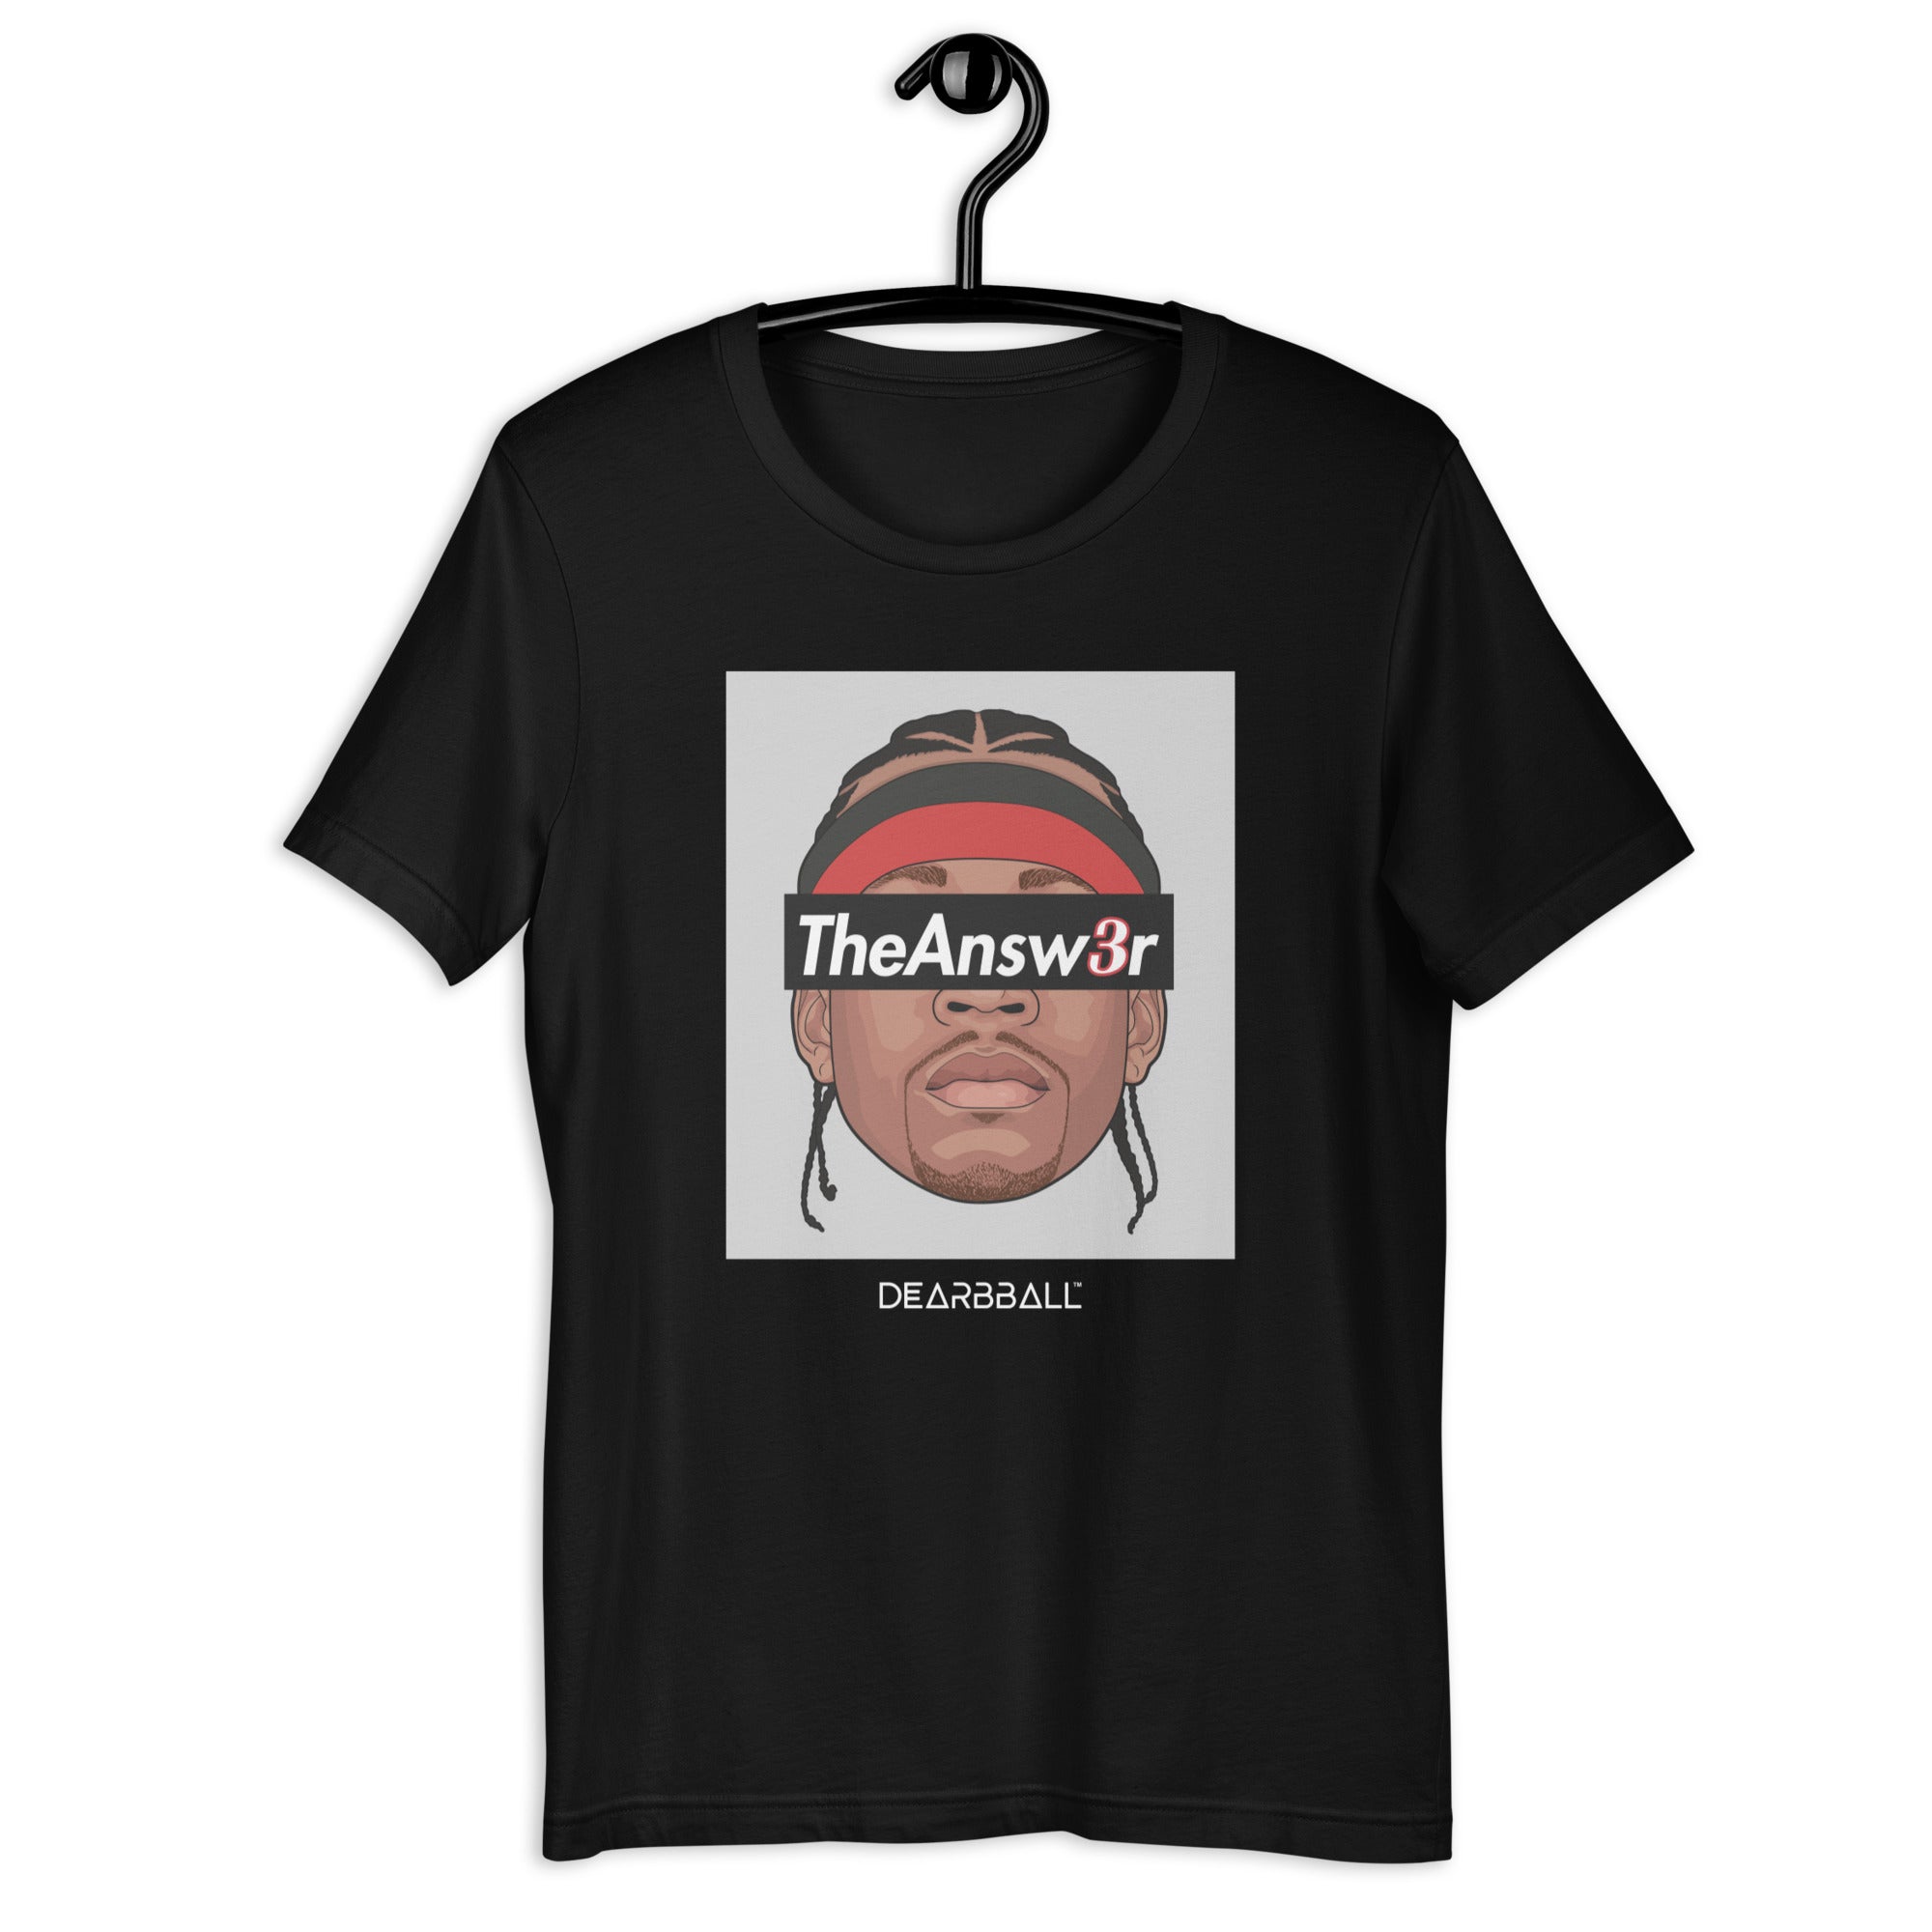 Grande taille T-shirt DearBBall - The Answer